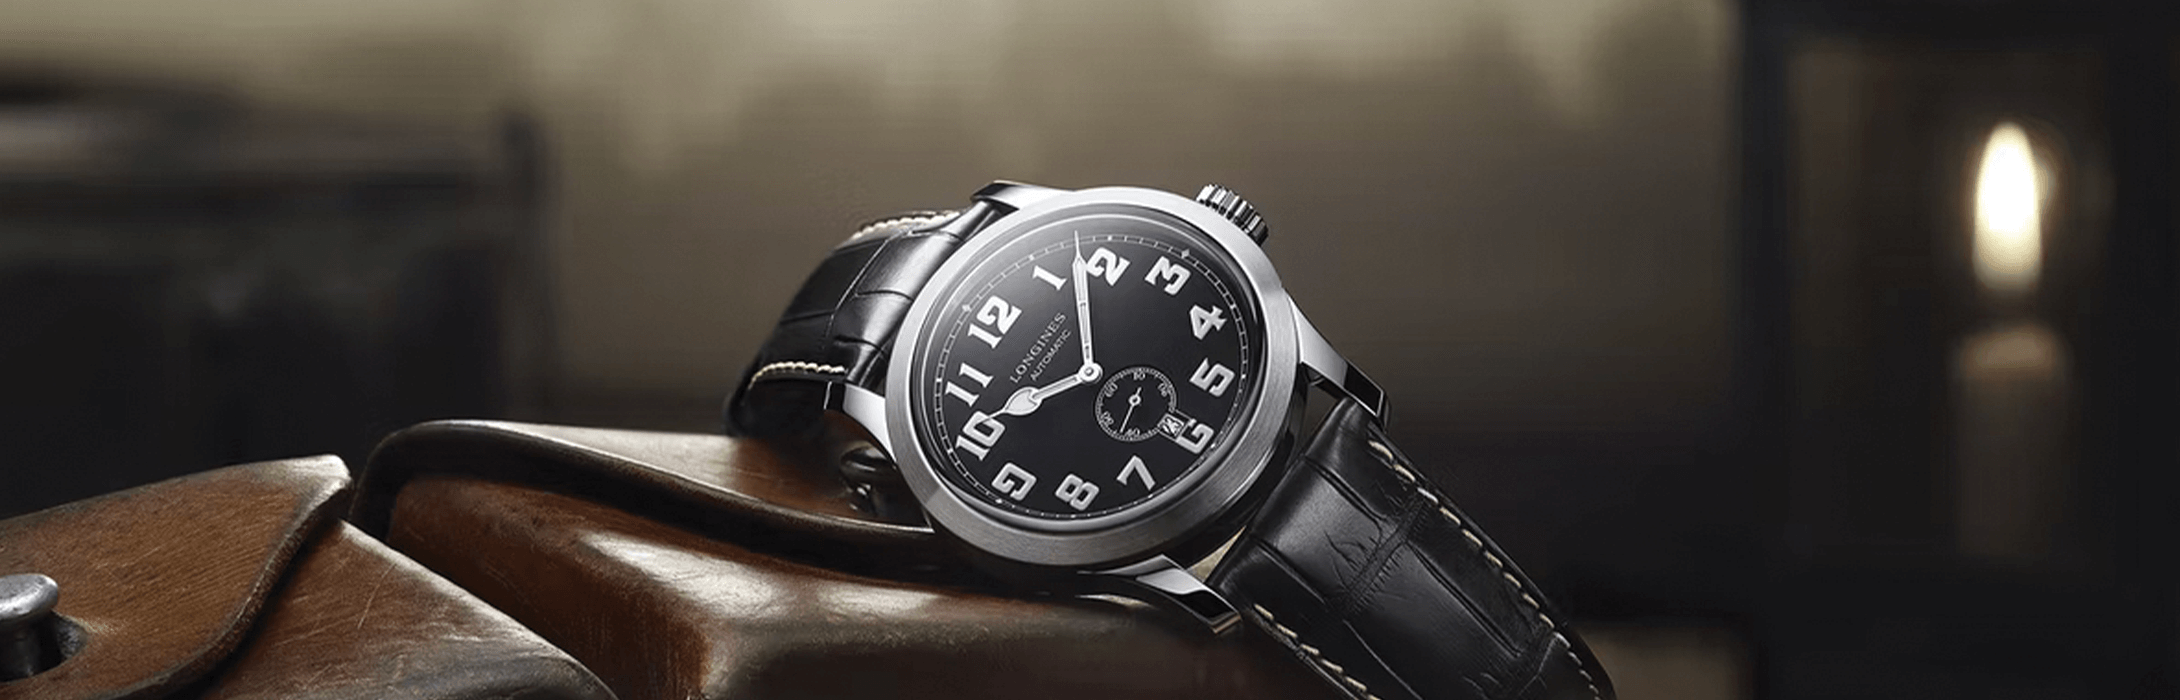 Longines Buying Guide